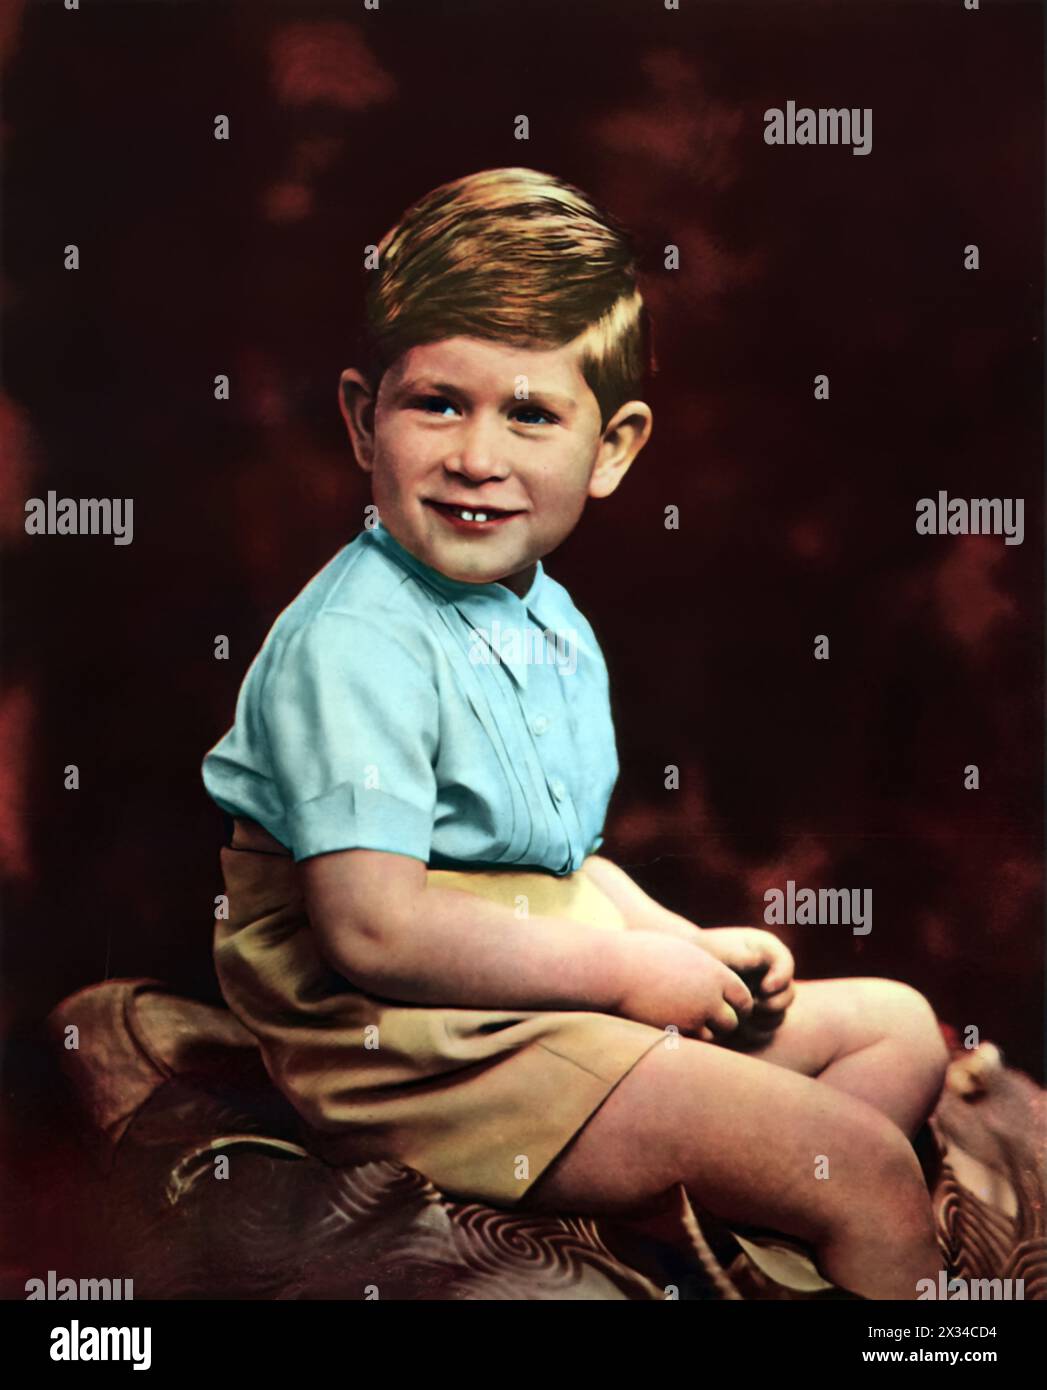 This portrait captures a young Prince Charles III at age 4, taken in 1952. The image offers a glimpse into the early life of the royal before he assumed his future responsibilities as the King of the UK and the Commonwealth realms. Stock Photo